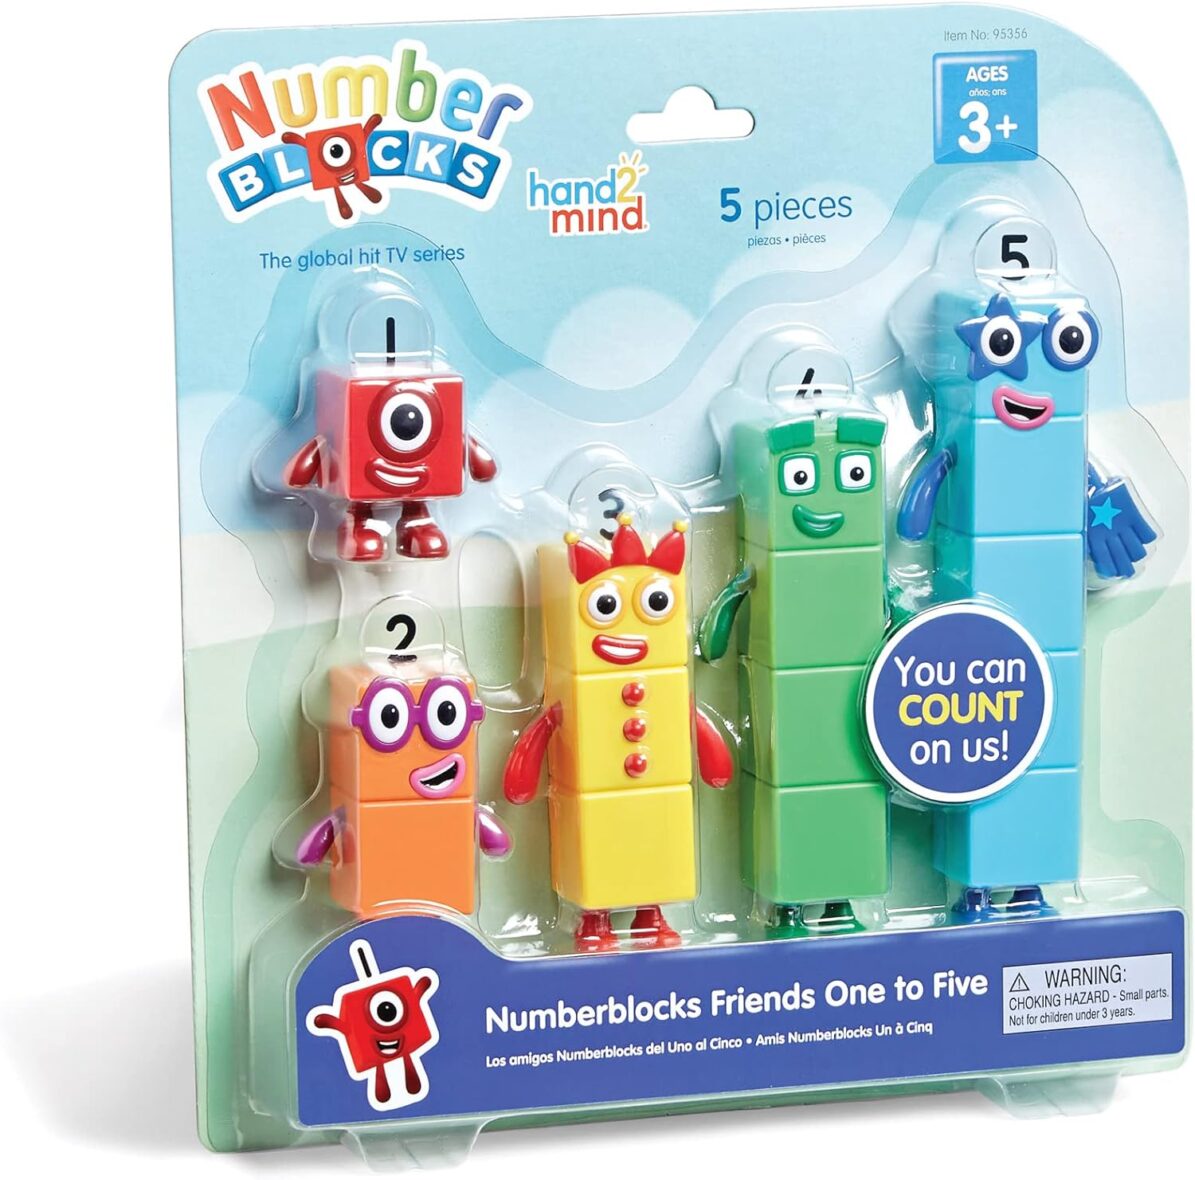 hand2mind Numberblocks Friends One to Five Figures, Toy Figures Collectibles, Small Cartoon Figurines for Kids, Mini Action Figures